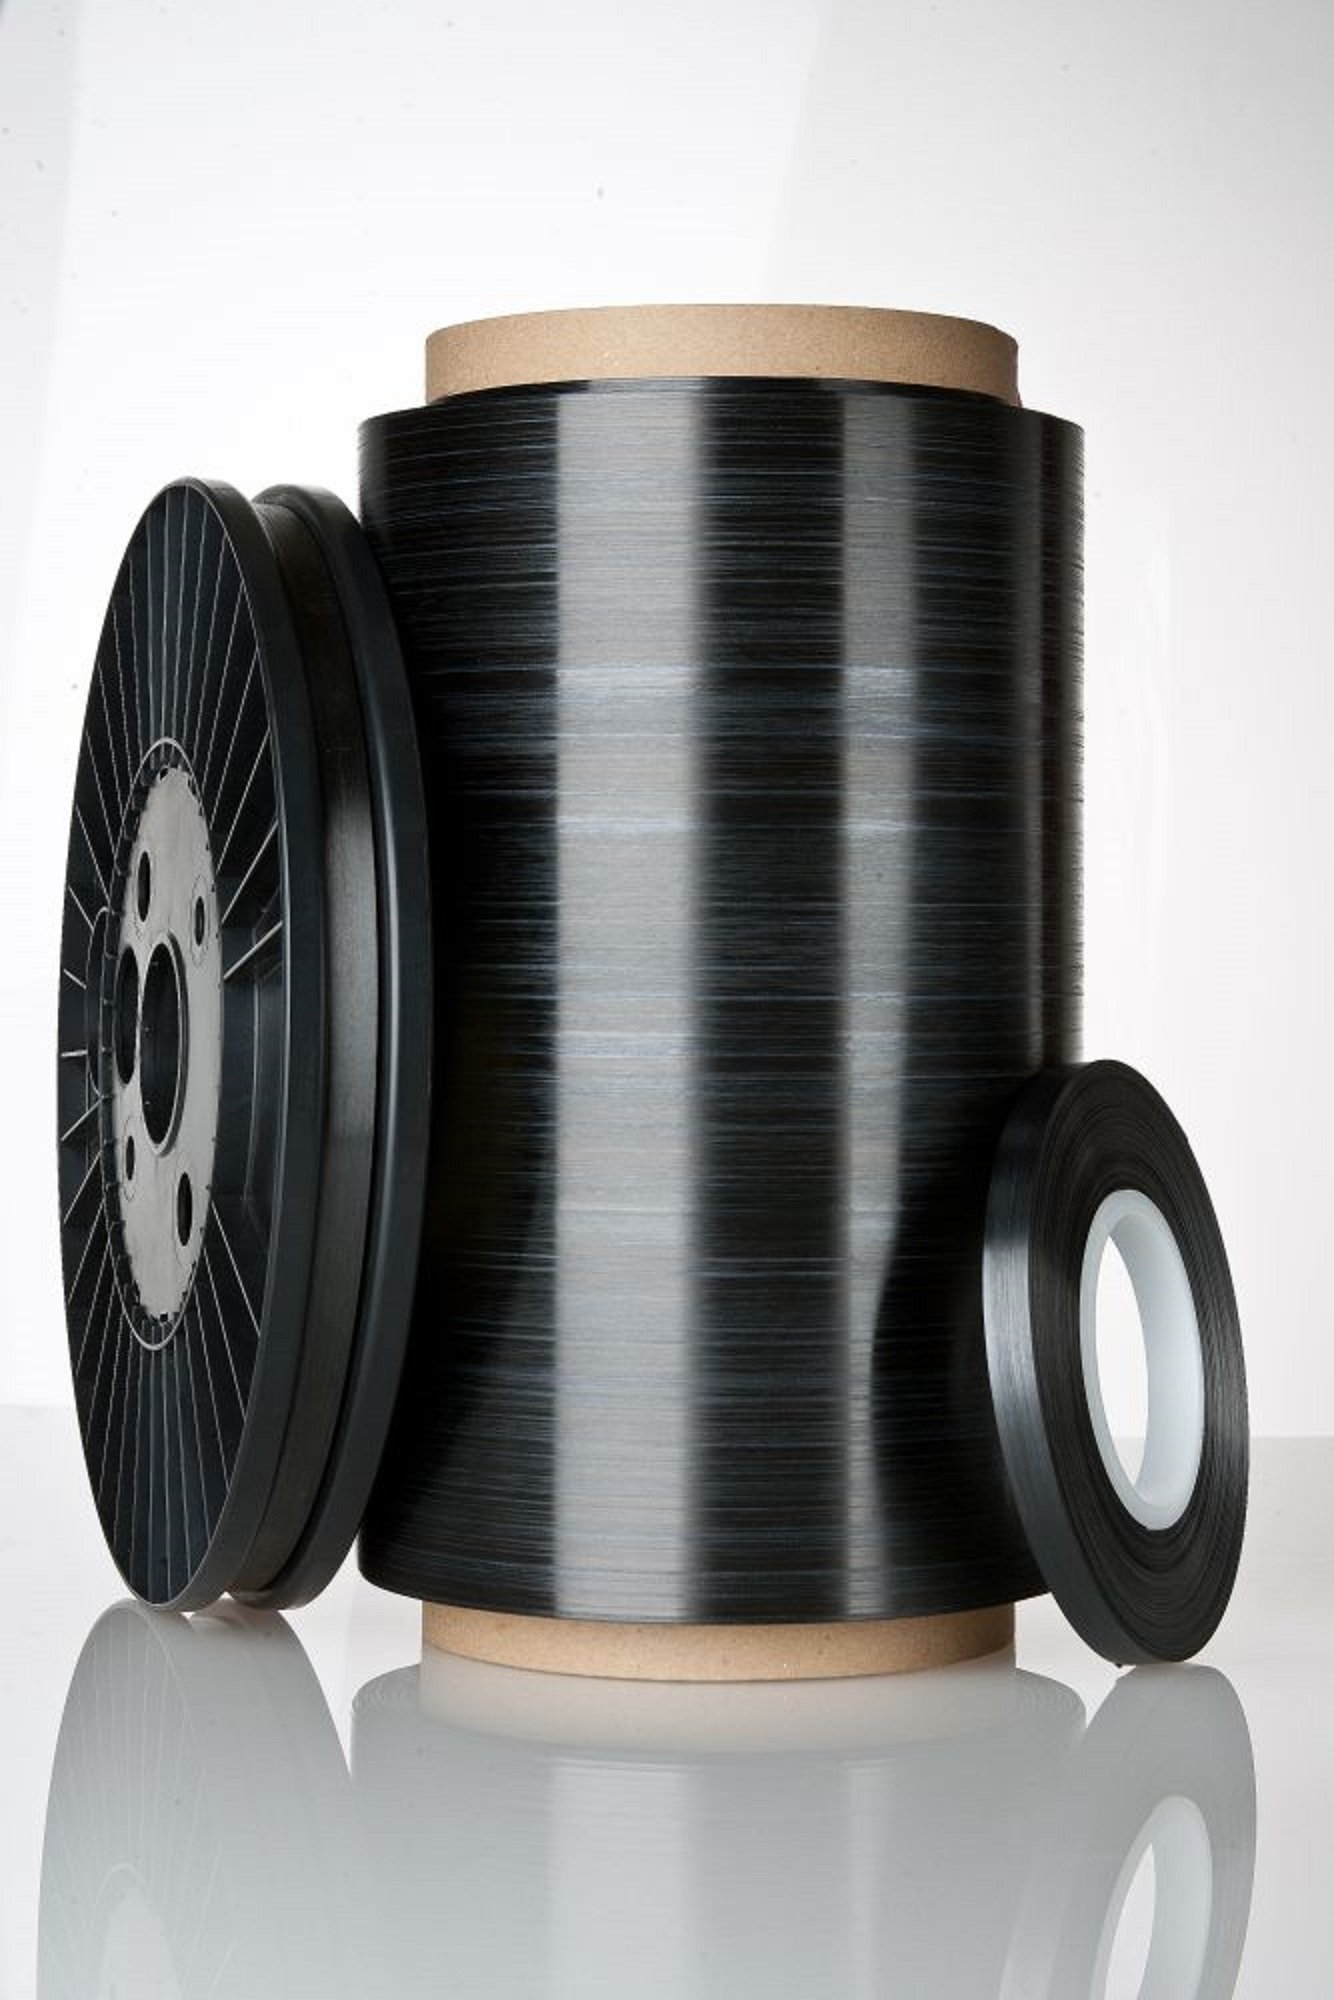 Teijin’s Tenax TPUD, unidirectional, carbon fiber-reinforced, thermoplastic, pre-impregnated tape. Source: Teijin (Click image to enlarge)